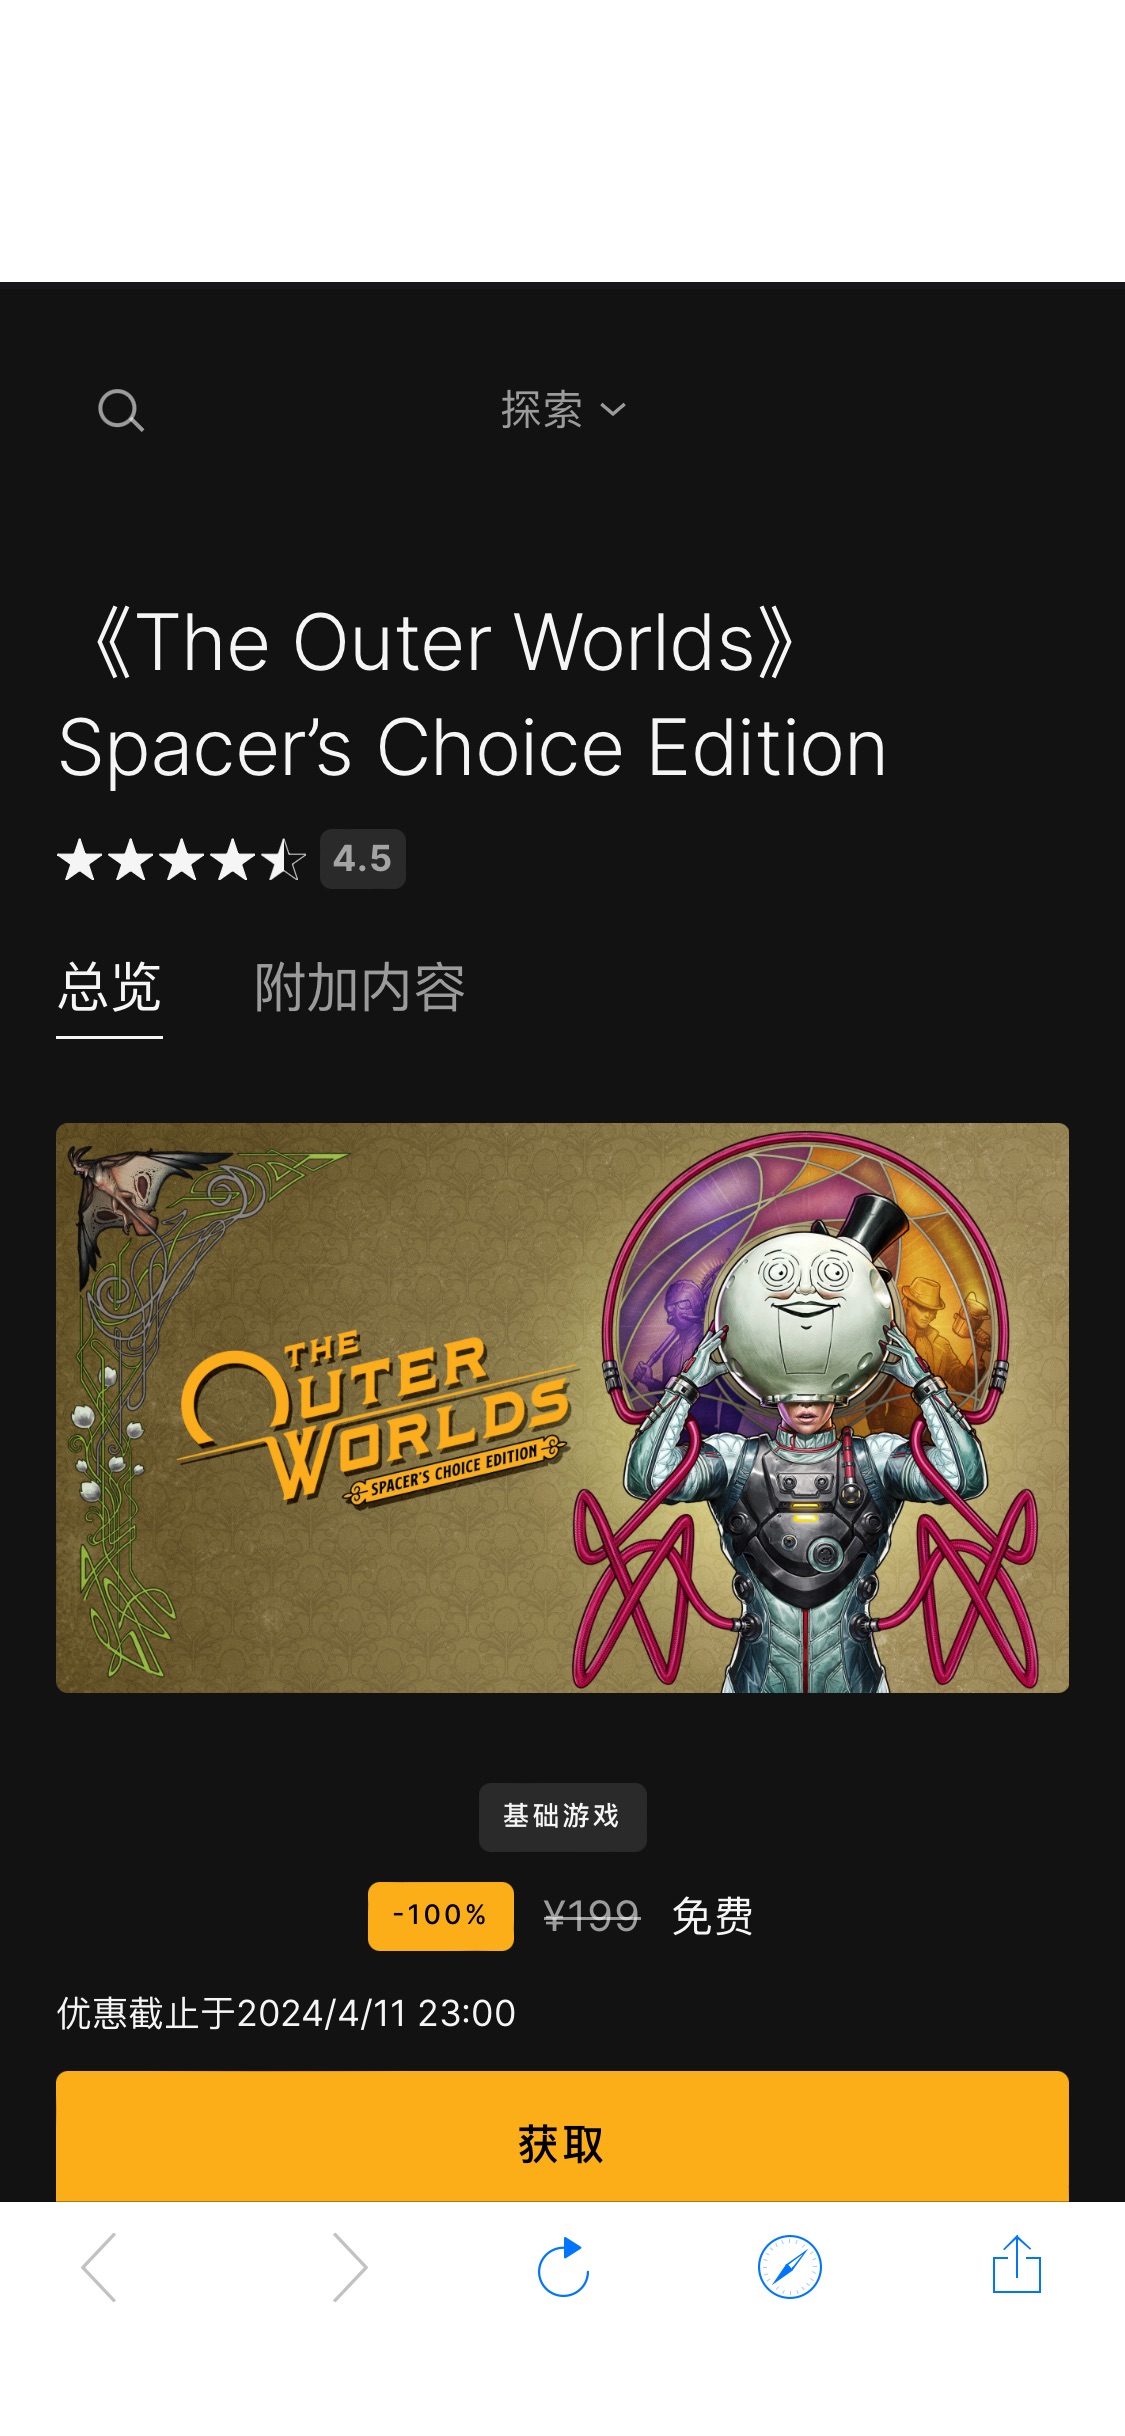 《The Outer Worlds》Spacer’s Choice Edition | EPIC 喜加一 免费领《天外世界》